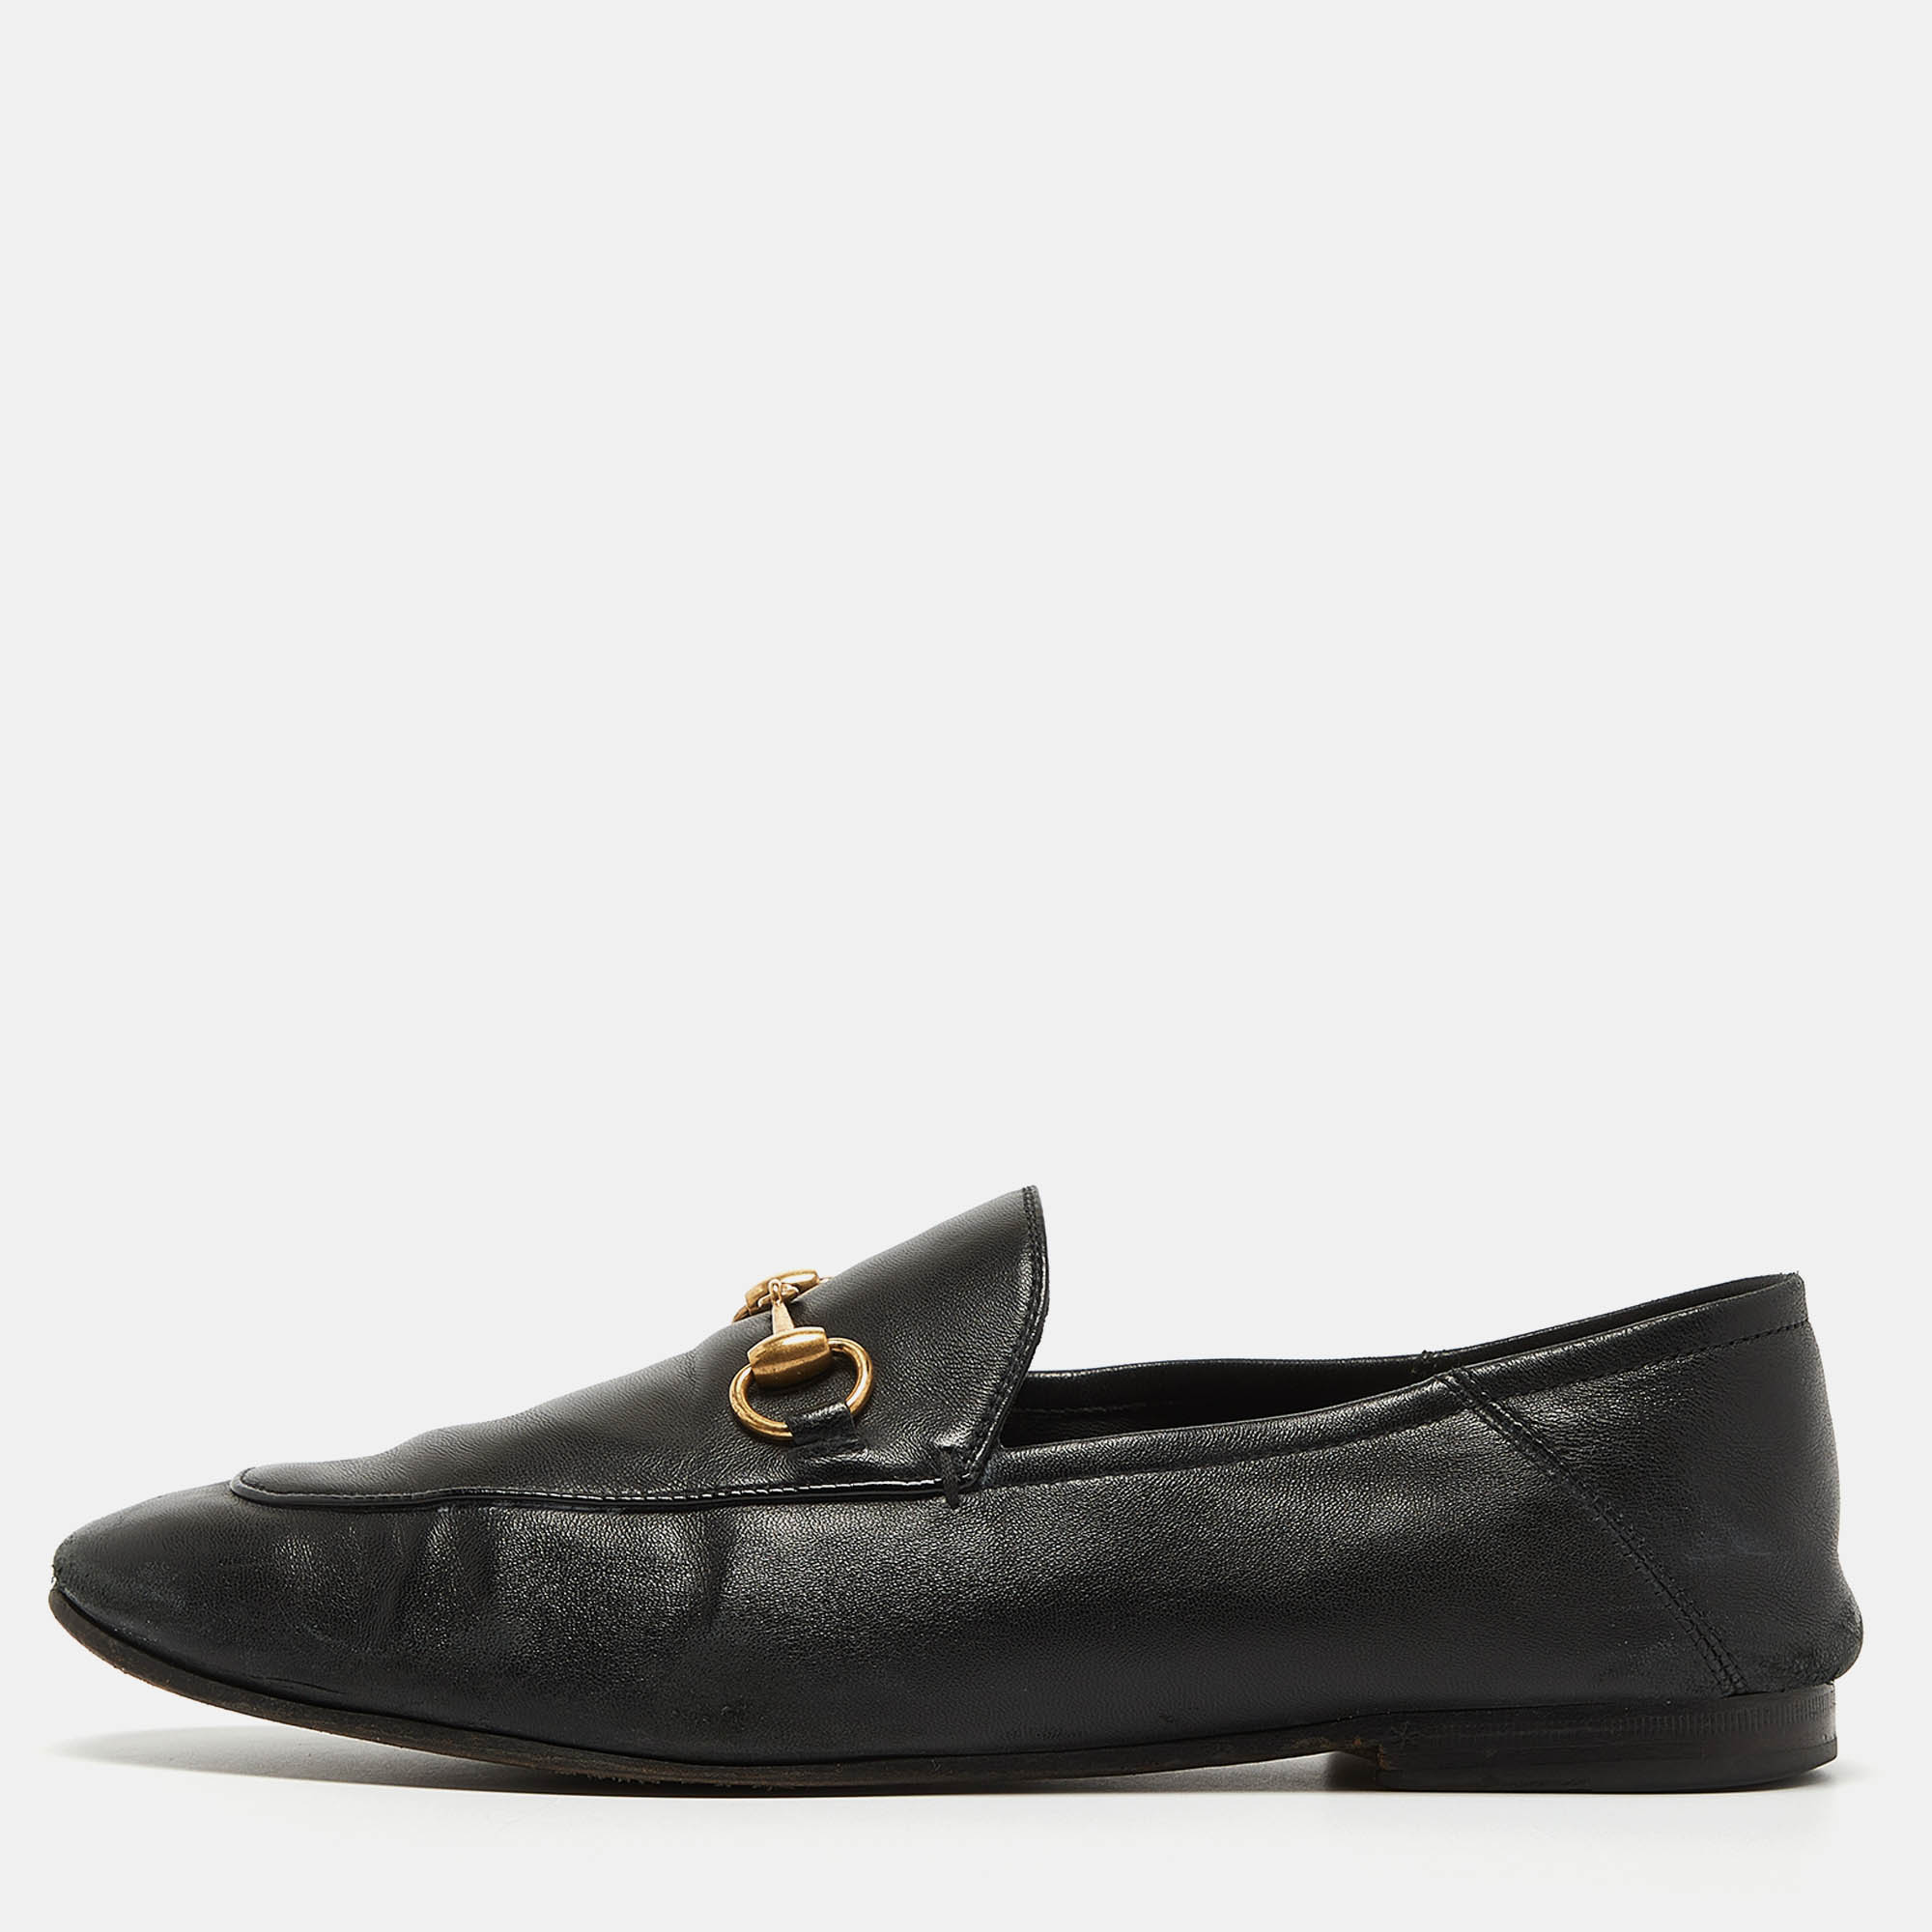 

Gucci Jordaan Black Leather Slip On Loafers Size 42.5